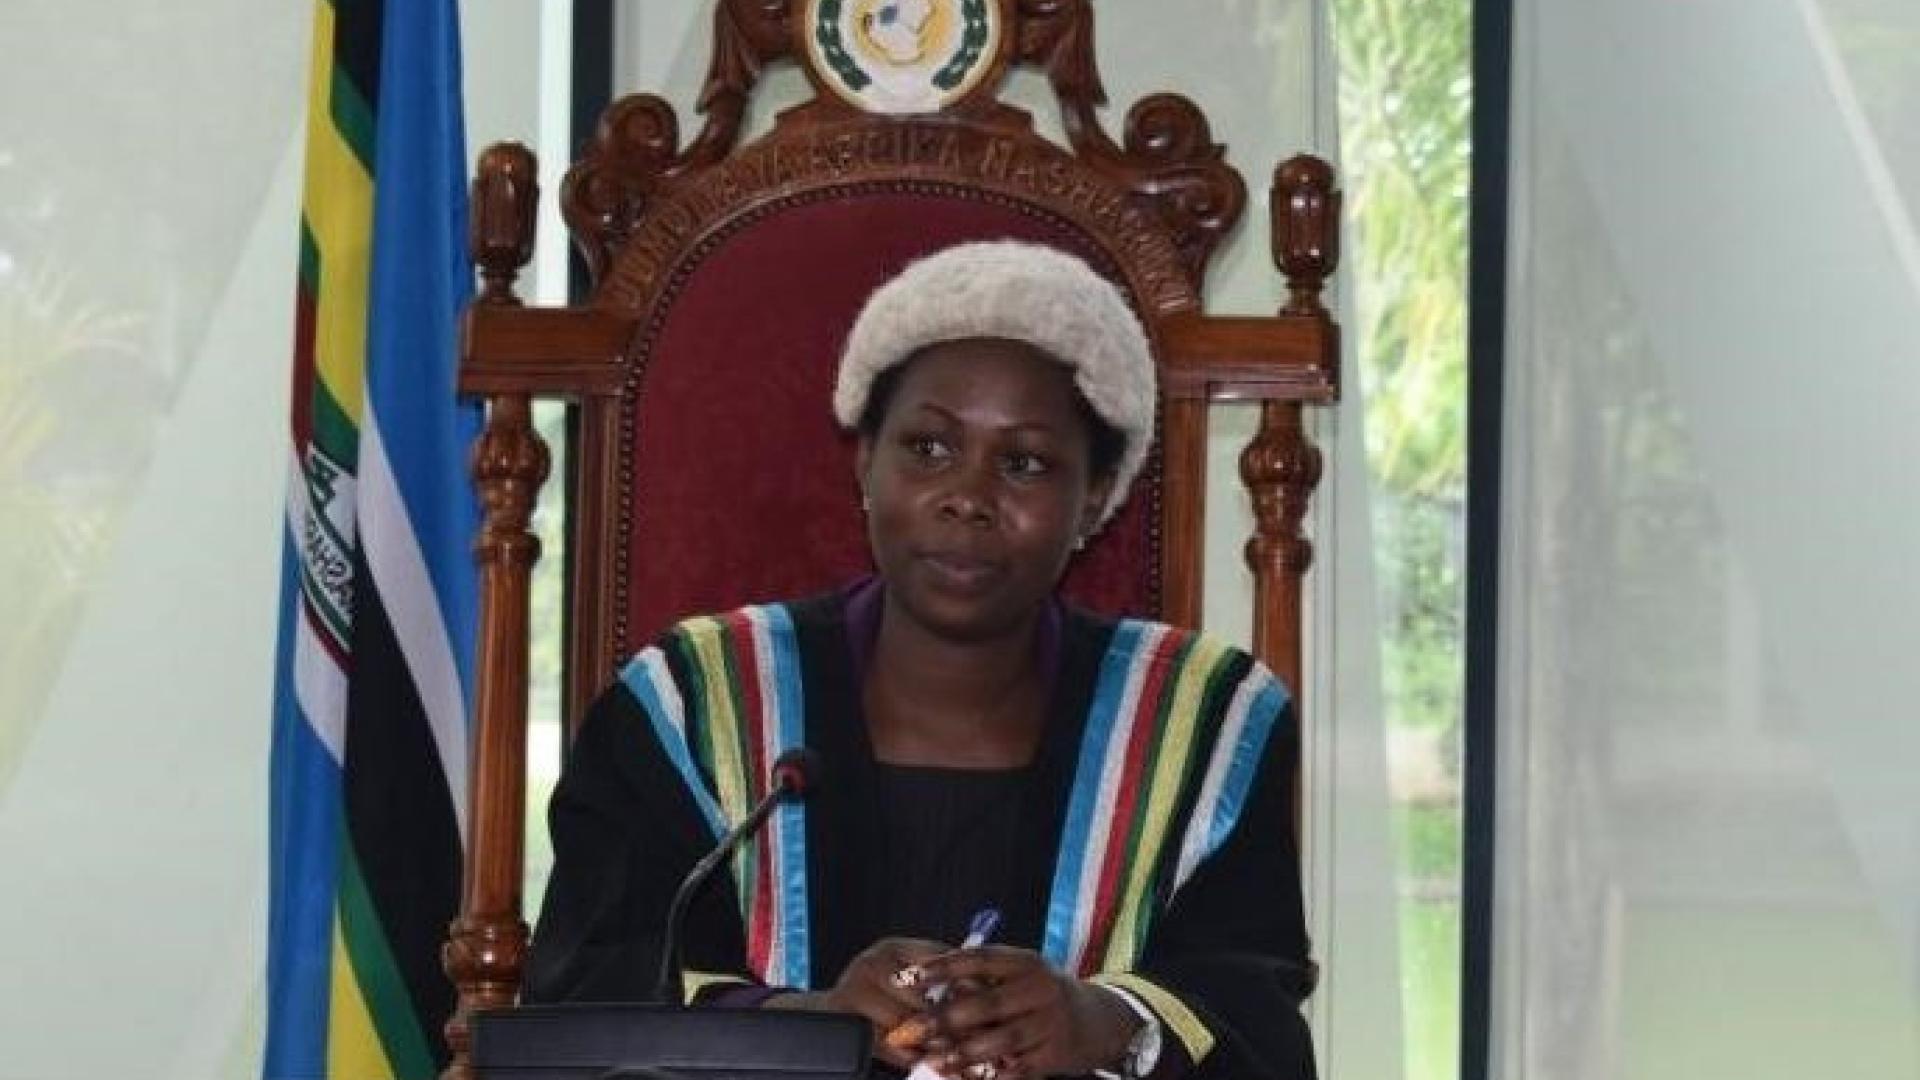 A woman sitting wearing parliamentary leadership robes